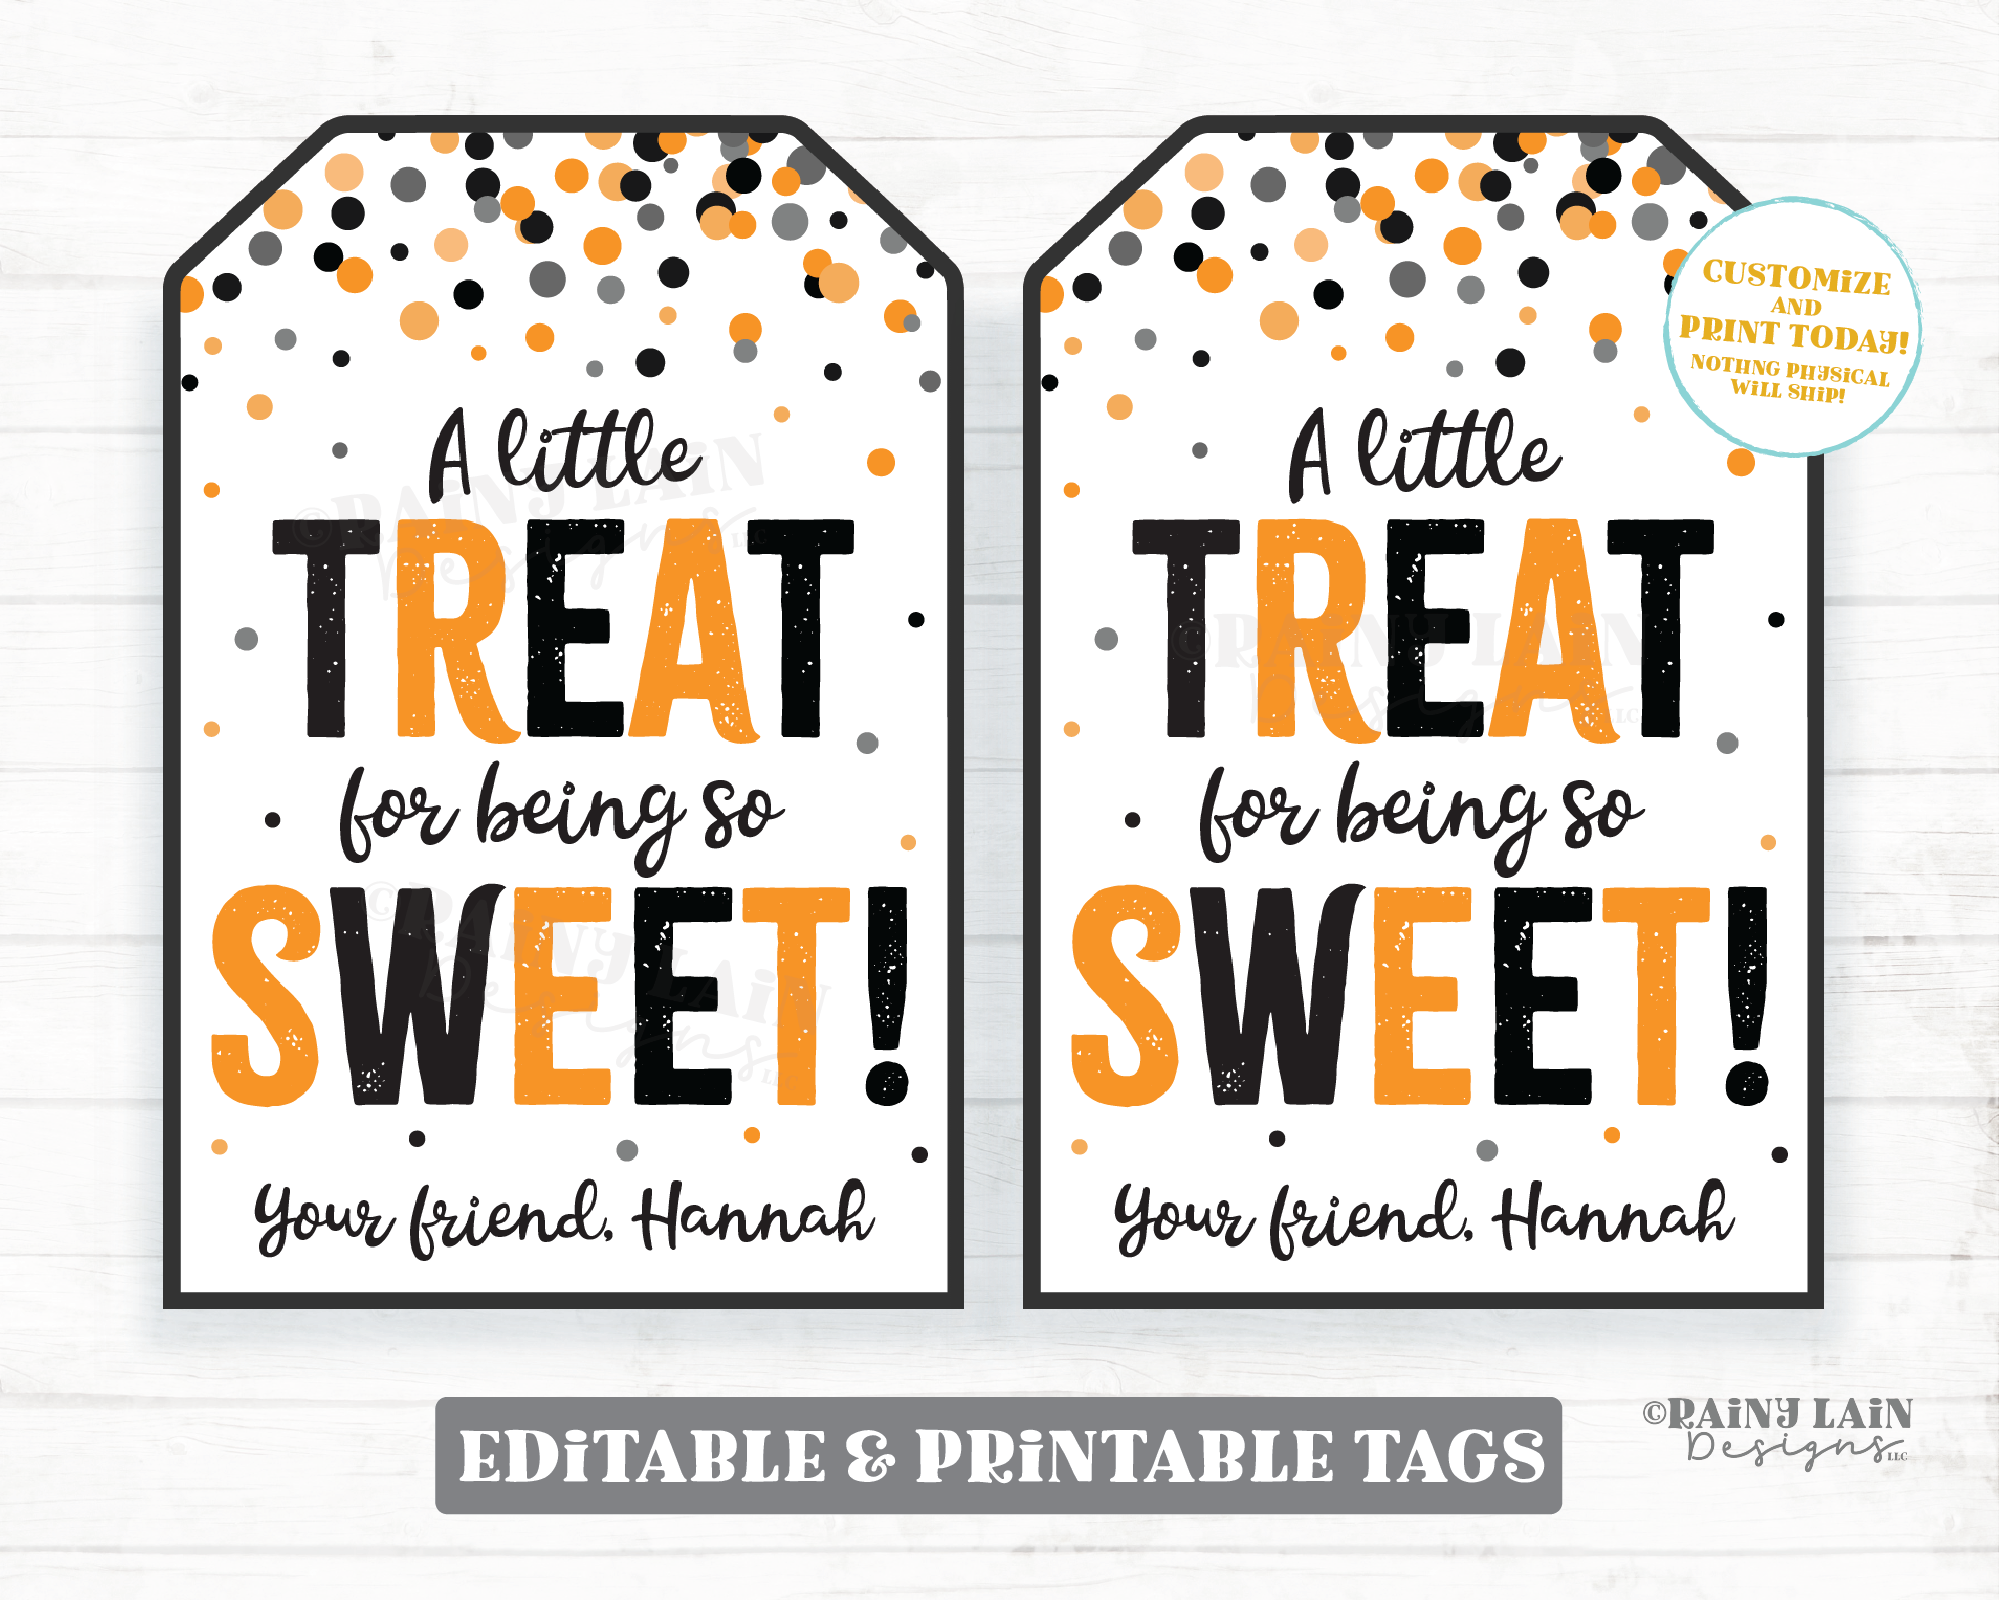 Halloween Treat for Someone Sweet Tag Appreciation Thank you Favor Teacher Halloween Gift Tags Staff Employee School Coach Co-Worker Student